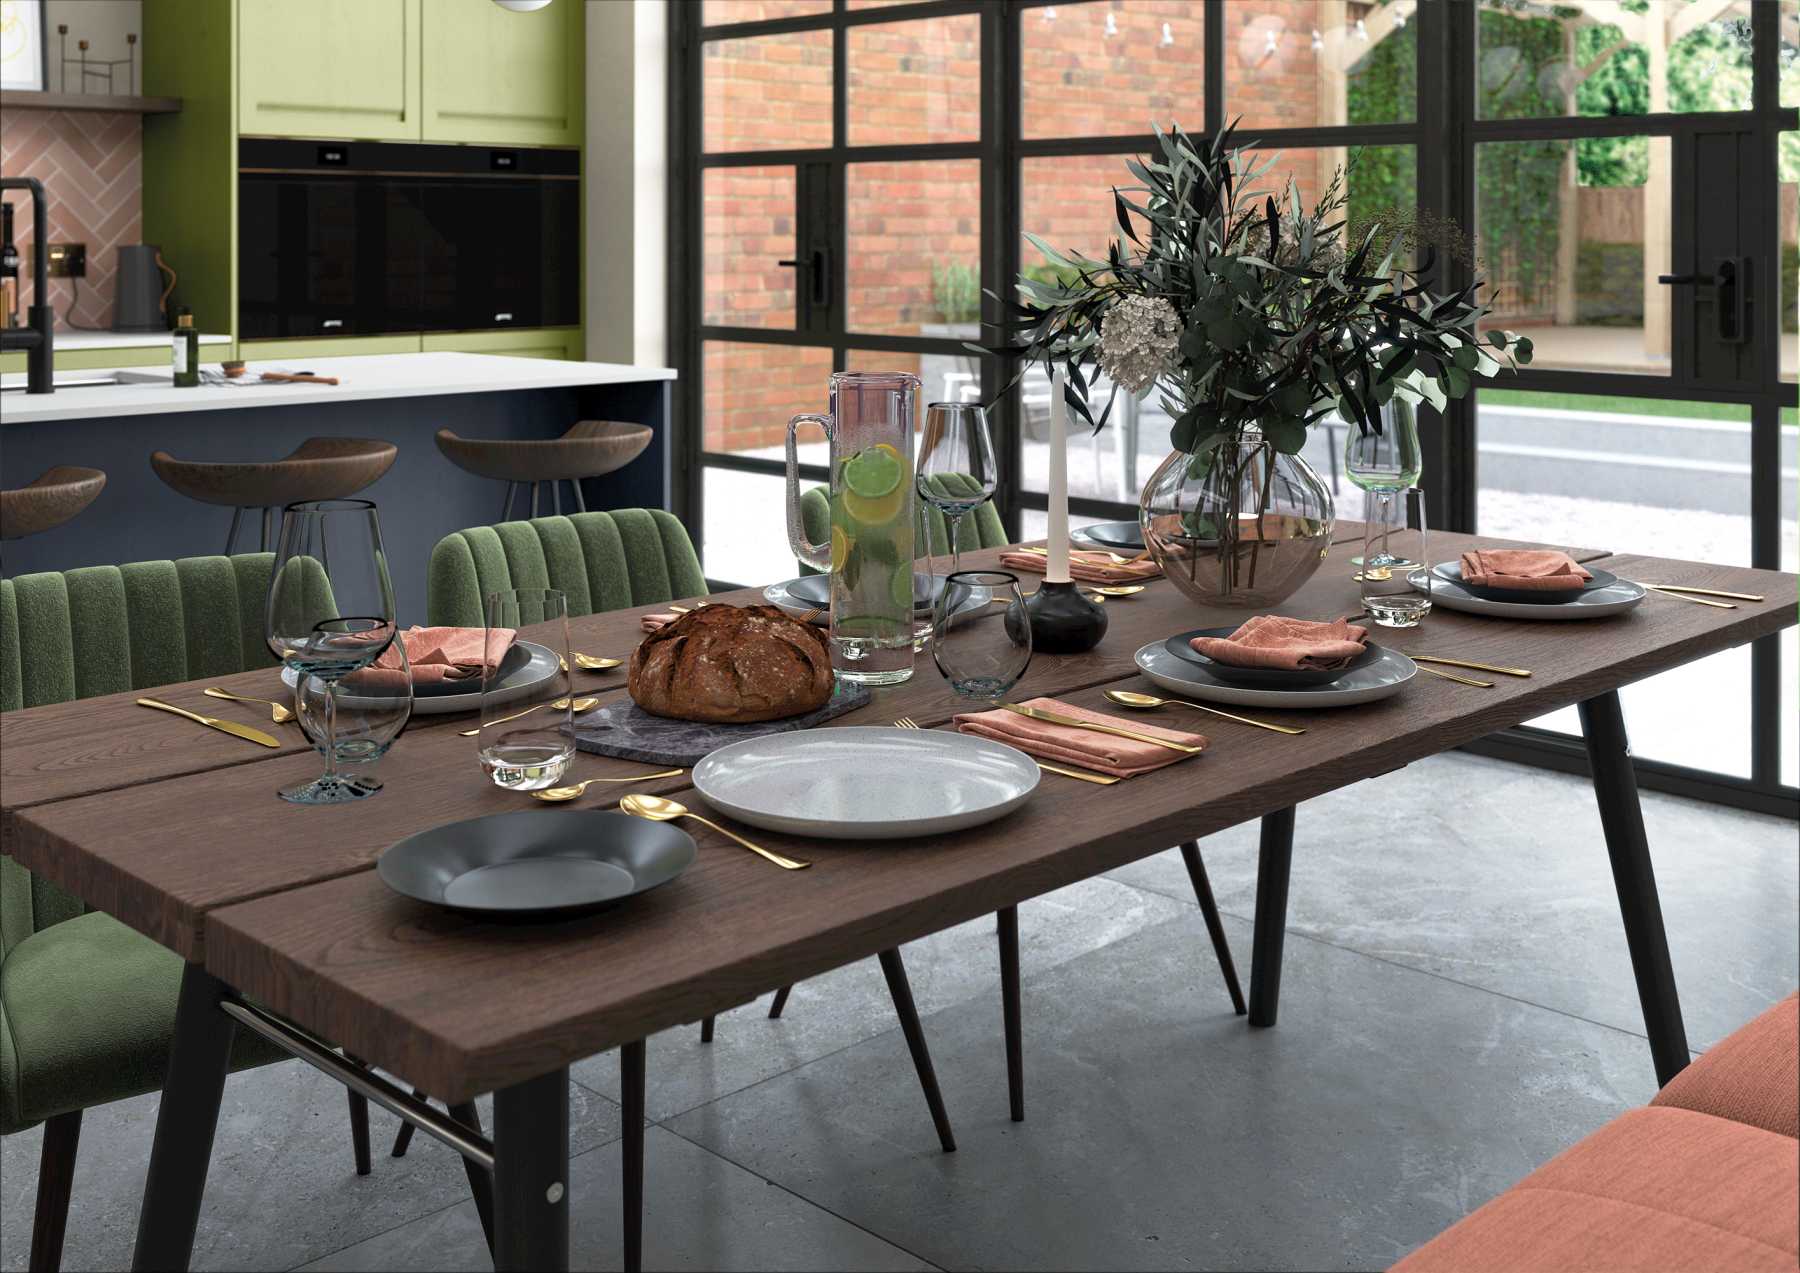 Handleless Shaker-Style Kitchen Painted Slate Blue and Citrus Green featuring dining table and chairs 